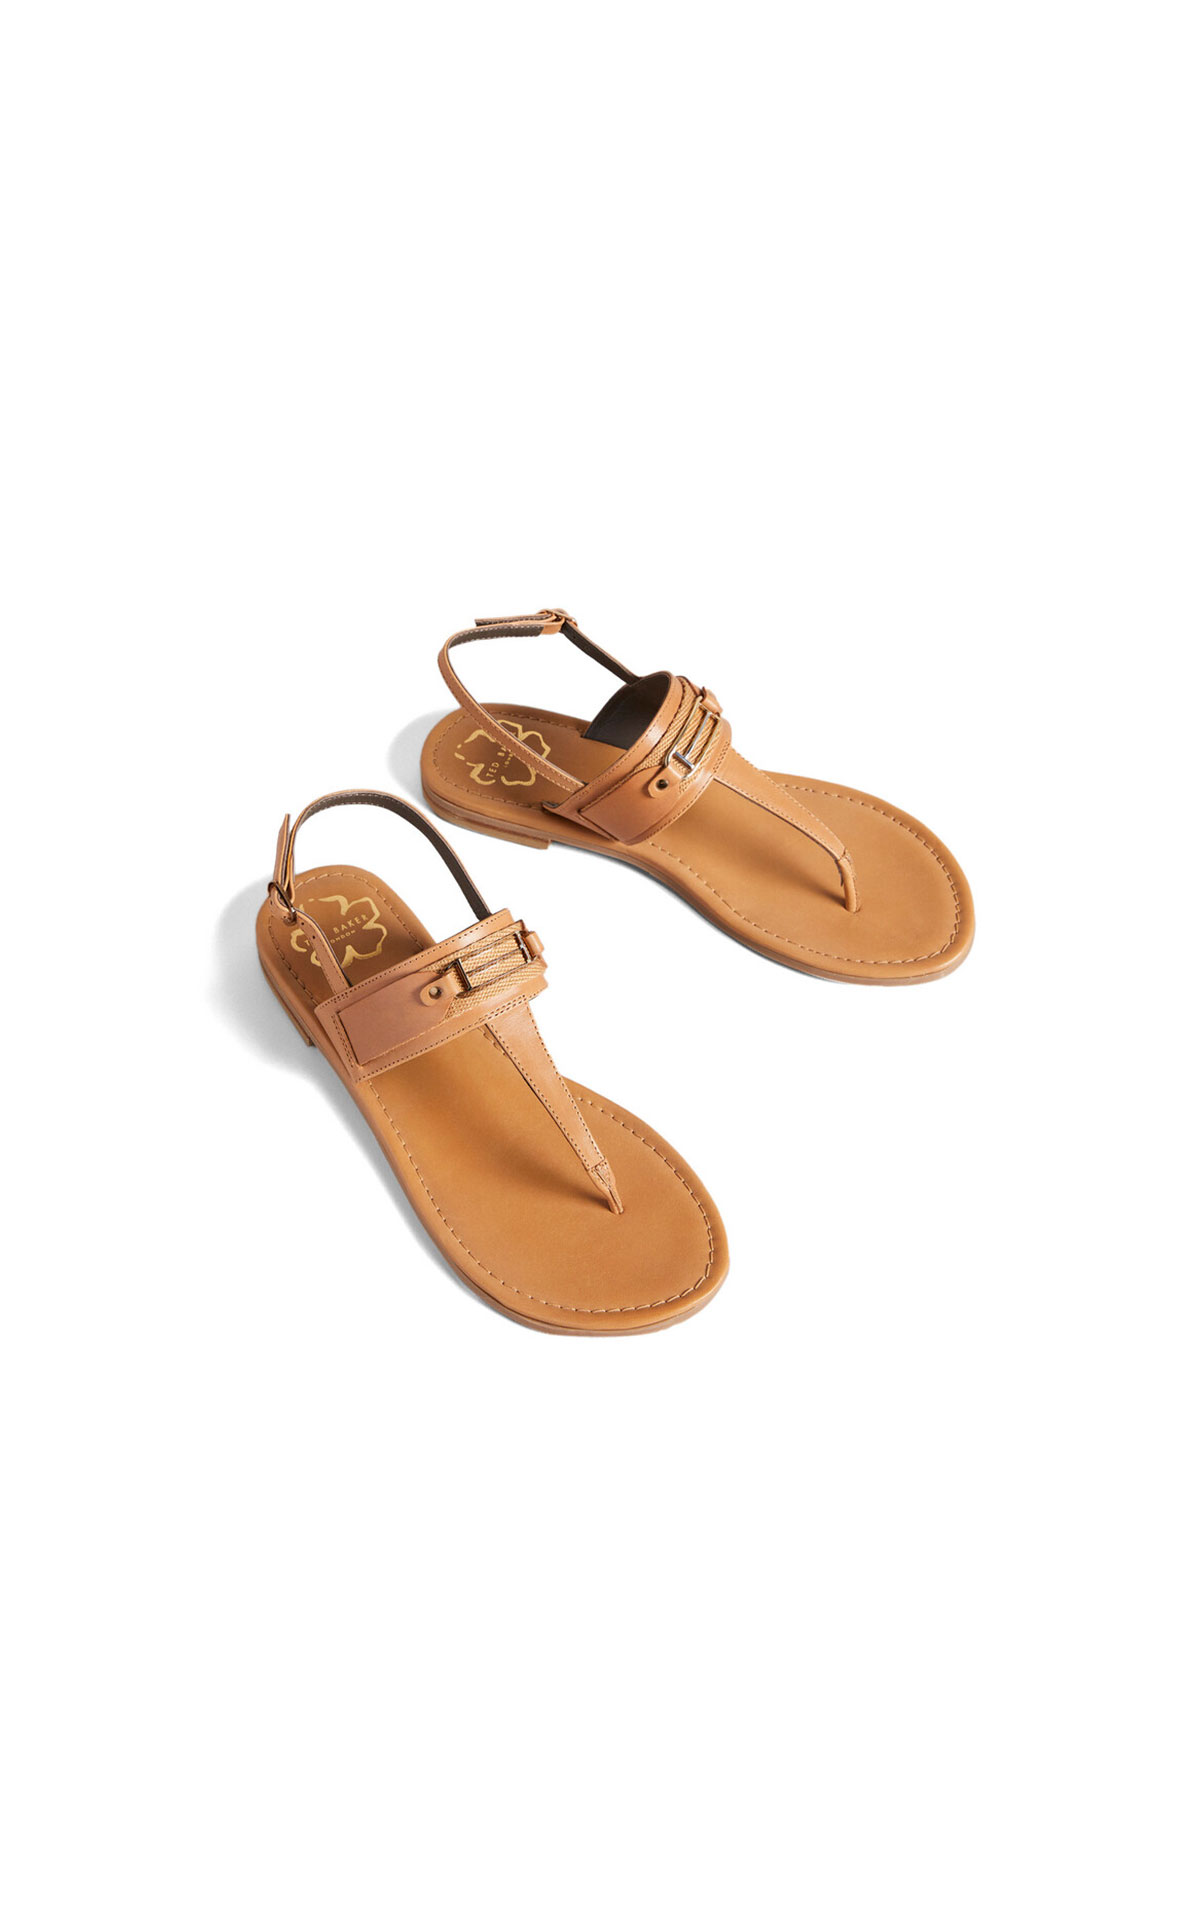 Ted Baker Leather toe post flat sandal from Bicester Village